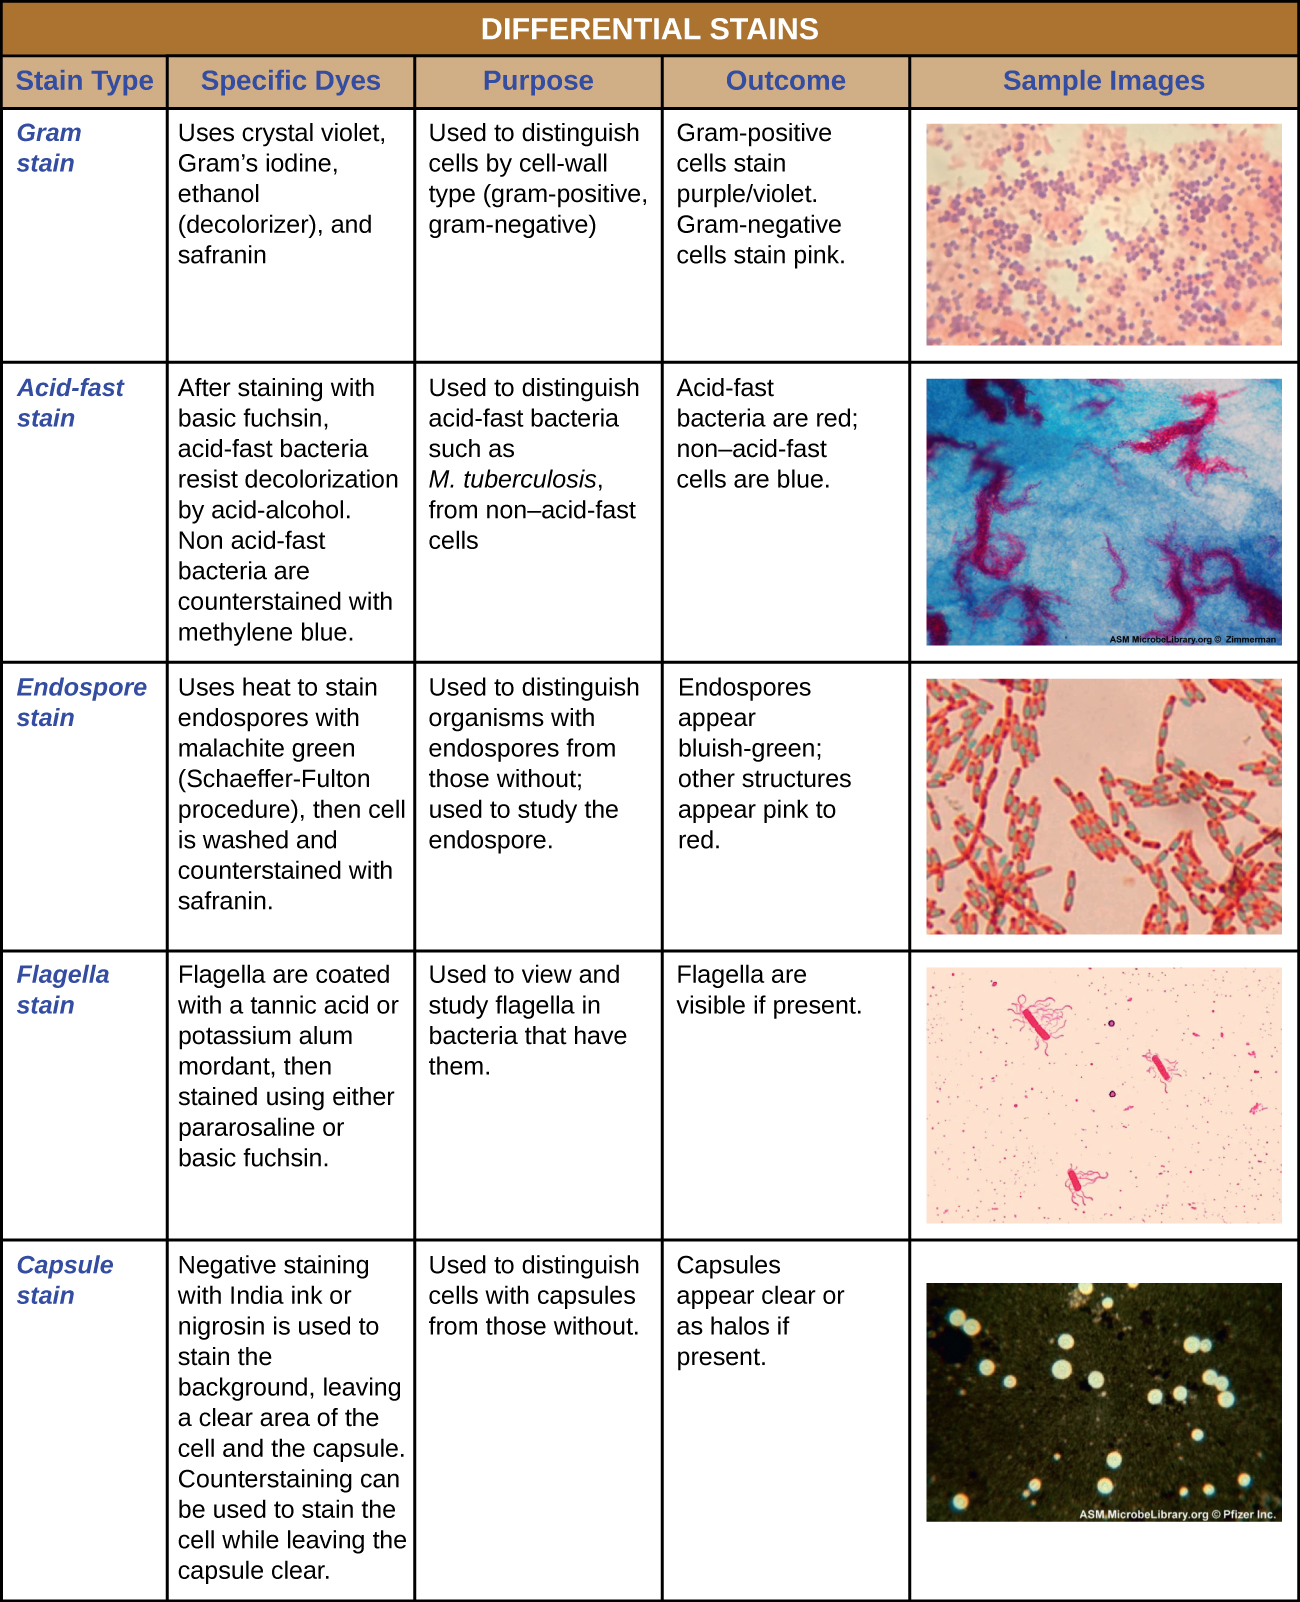 A table of differential stains is shown. The Gram stain uses crystal violet, Gram’s iodine, ethanol (decolorizer), and safranin. The purpose of the Gram stain is to distinguish cells by cell-wall type (Gram-positive, Gram-negative). Gram-positive cells stain purple/violet. Gram-negative cells stain pink. The acid fast stain: after staining with basic fuchsin, acid-fast bacteria resist decolonization by acid-alcohol. Non-acid-fast bacteria are counterstained with methylene blue. The acid-fast stain is used to distinguish acid-fast bacteria such as M. tuberculosis, from non-acid-fast cells. Acid-fast bacteria are red; non-acid-fast cells are blue. The Endospore stain uses heat to stain endospores with malachite green (Schaeffer-Fulton procedure), then cell is washed and counterstained with safranin. The endospore stain is used to distinguish organisms with endospores from those without; used to study the endospore. Endospores appear bluish-green; other structures appear pink to red. Flagella stain: flagella are coated with a tannic acid or potassium alum mordant, then stained using either pararosaline or basic fuchsin. The flagella stain is used to view and study flagella in bacteria that have them. Flagella are visible as thin strands if present. Capsule stain: negative staining with india ink or nigrosine is used to stain the background, leaving a clear area of the cell and the capsule Counterstaining can be used to stain the cell while leaving the capsule clear. The capsule stain is used to distinguish cells with capsules from those without. Capsules appear clear or as halos if present.